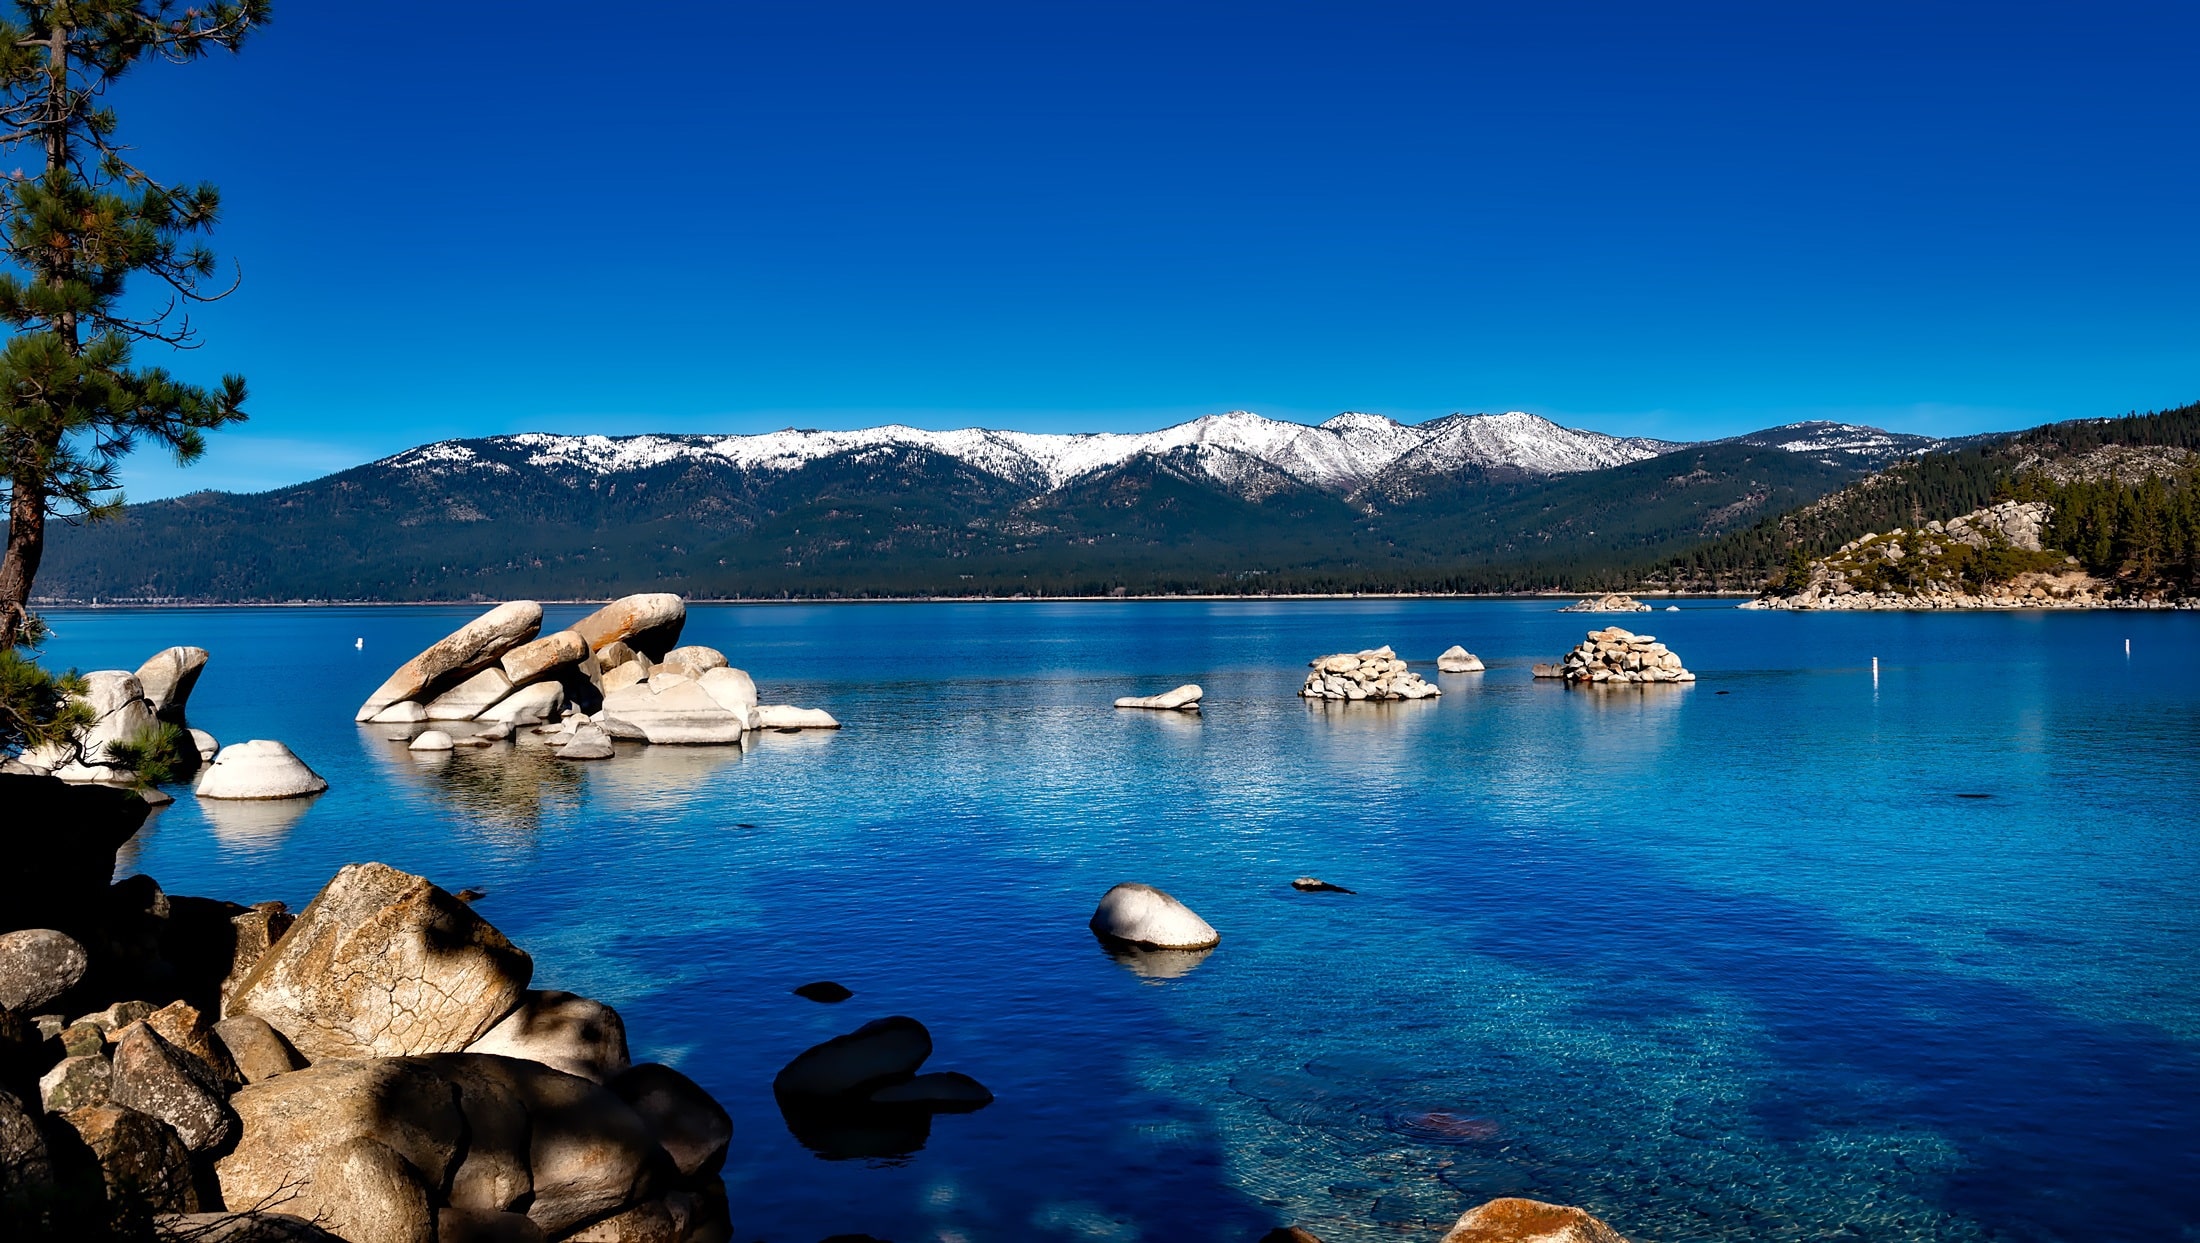 Beautiful scenery of Lake Tahoe with a snowy mountain in the background